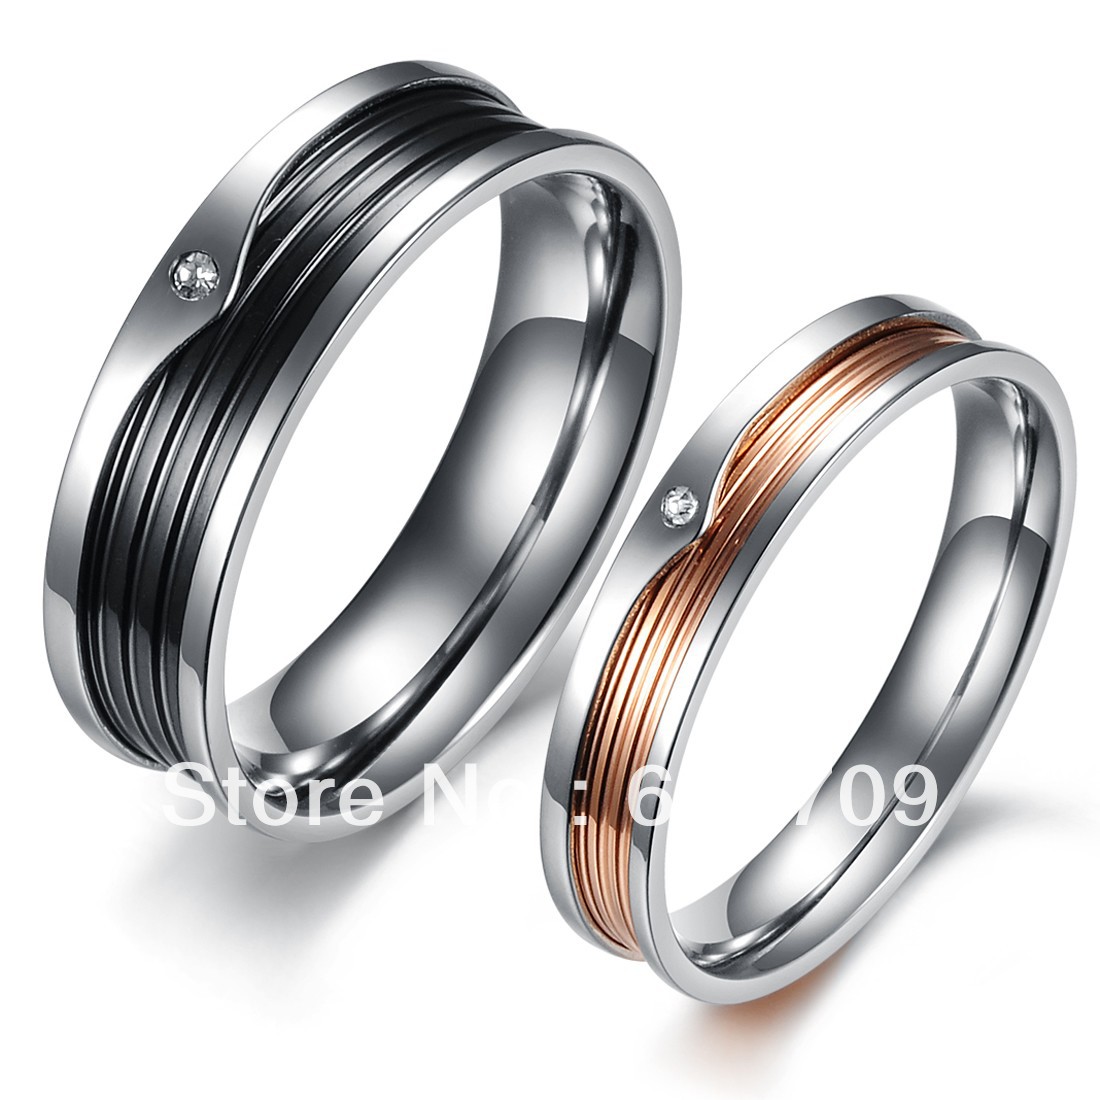 Free-shipping-unique-his-and-hers-promise-ring-sets-promise-rings-for ...